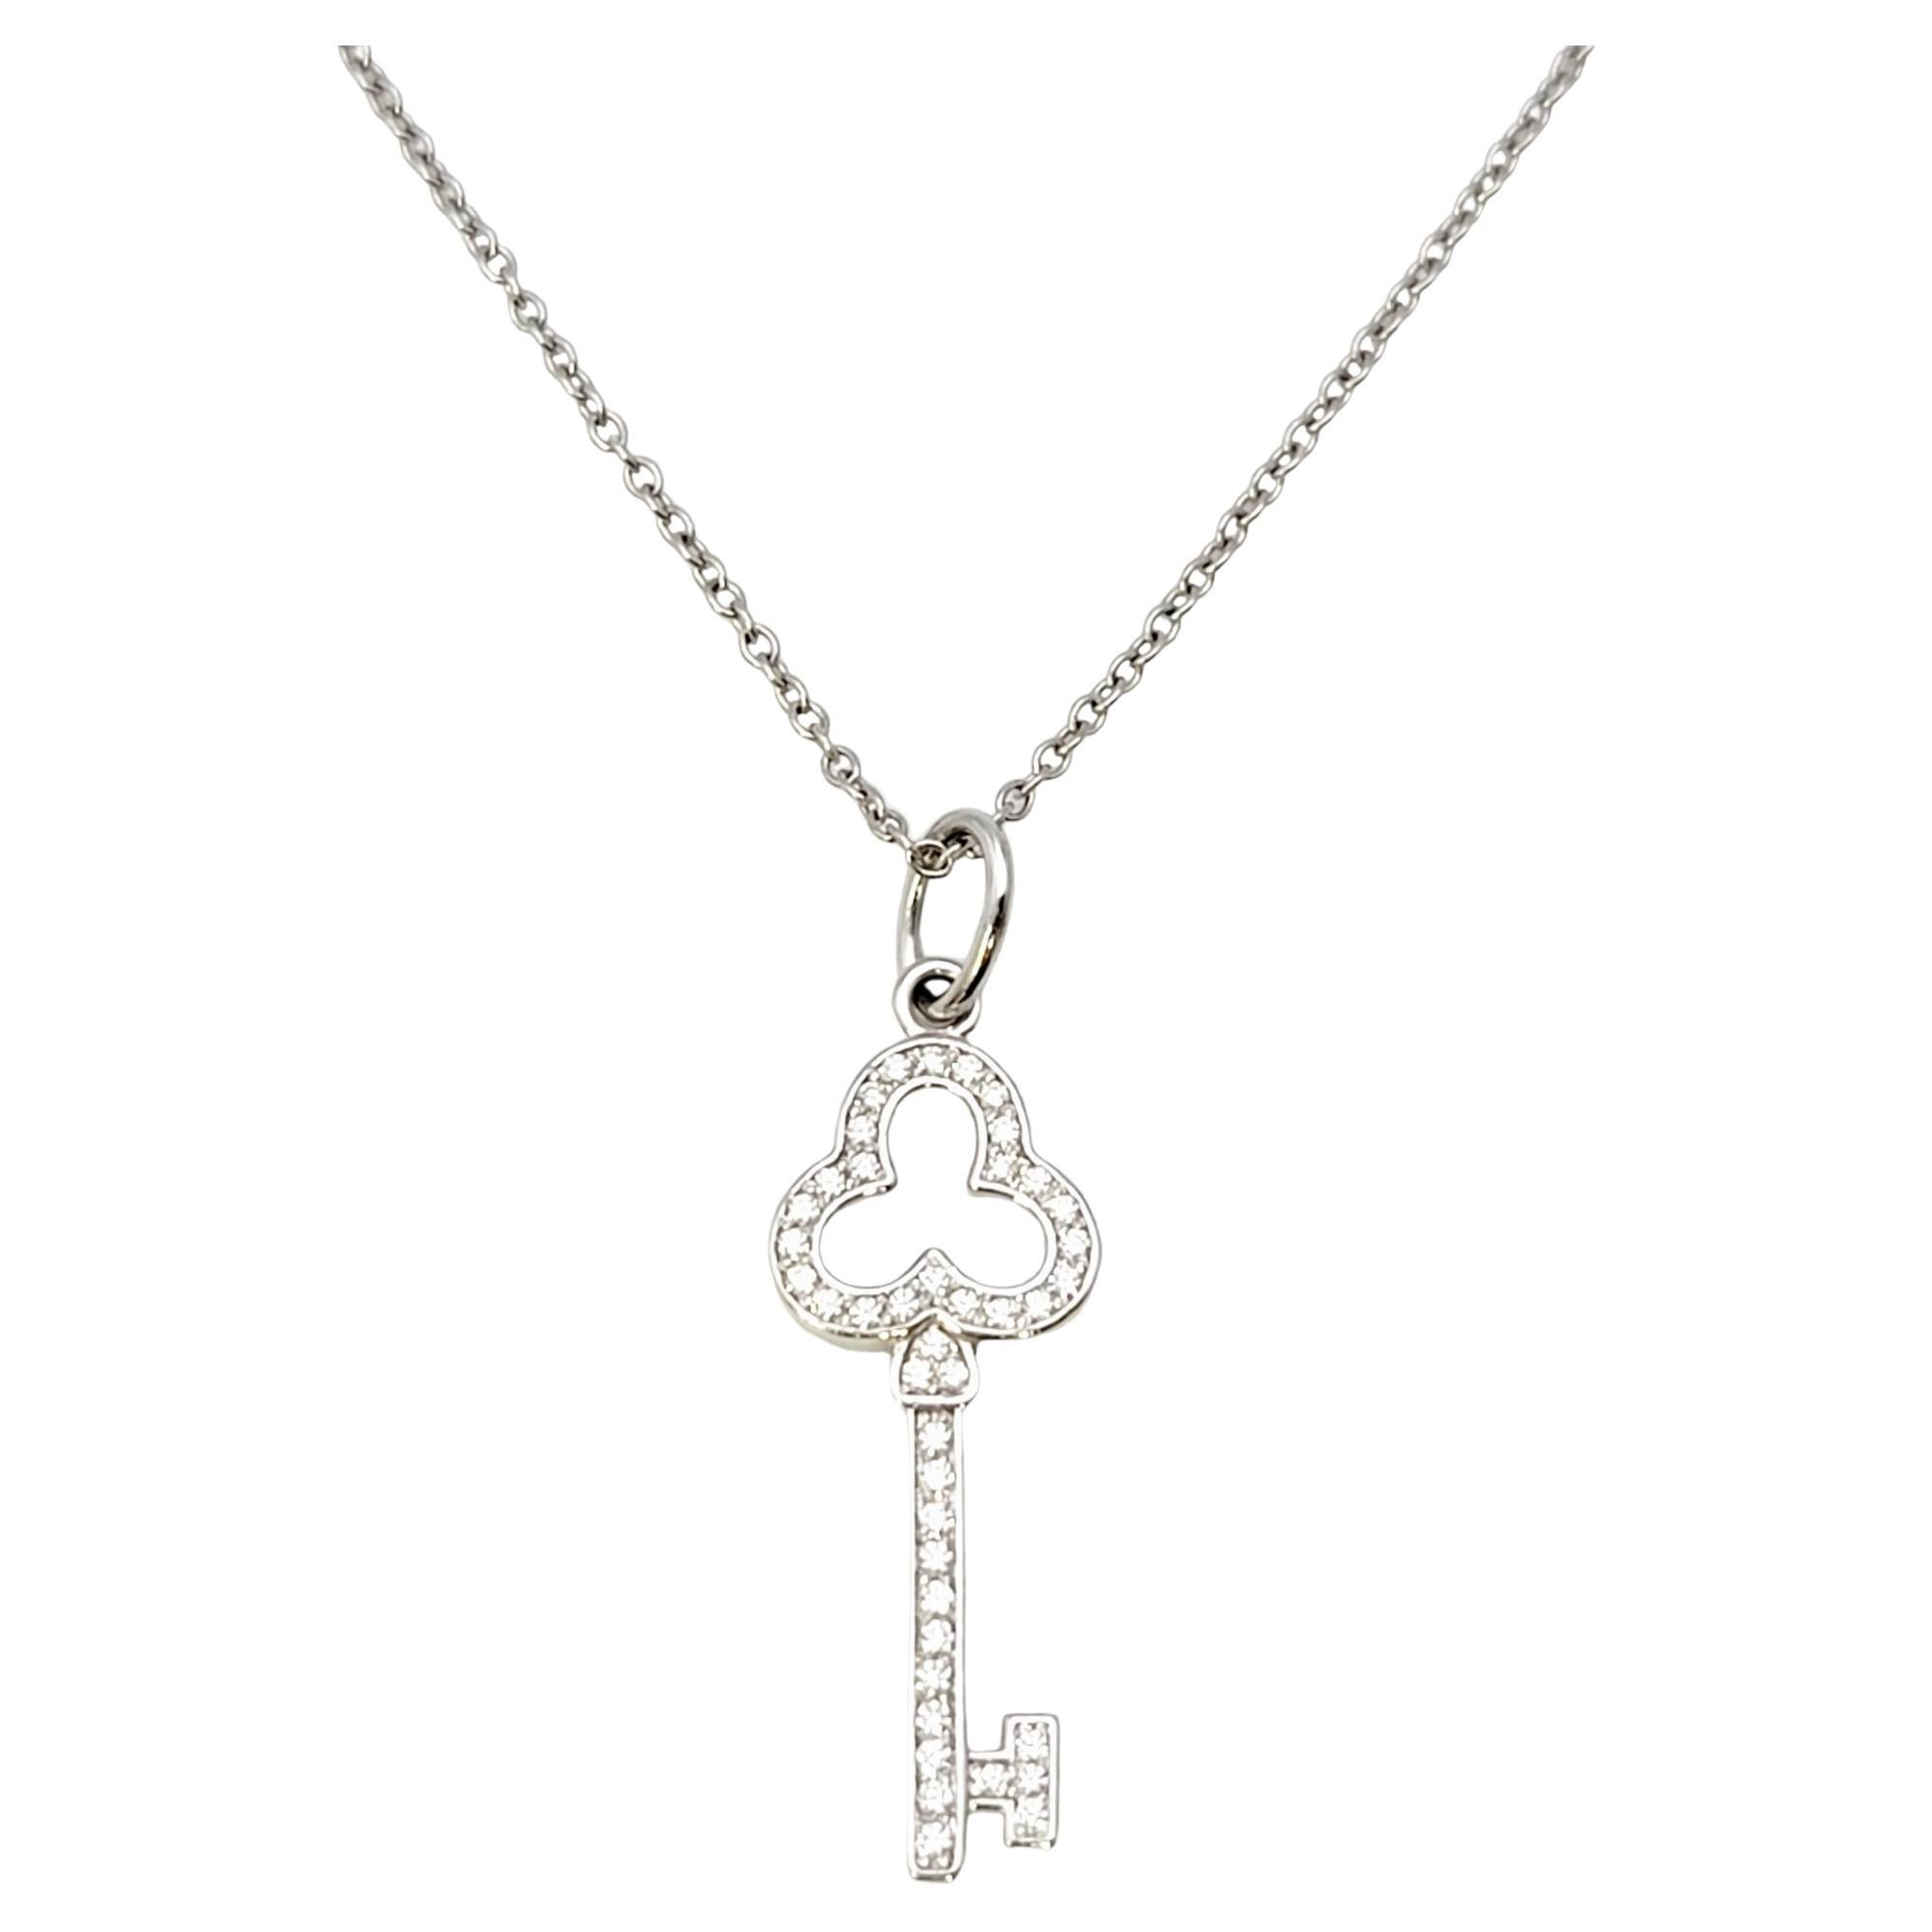 Tiffany & Co. Trefoil Key Pendant Necklace with Diamonds in 18 Karat White Gold For Sale